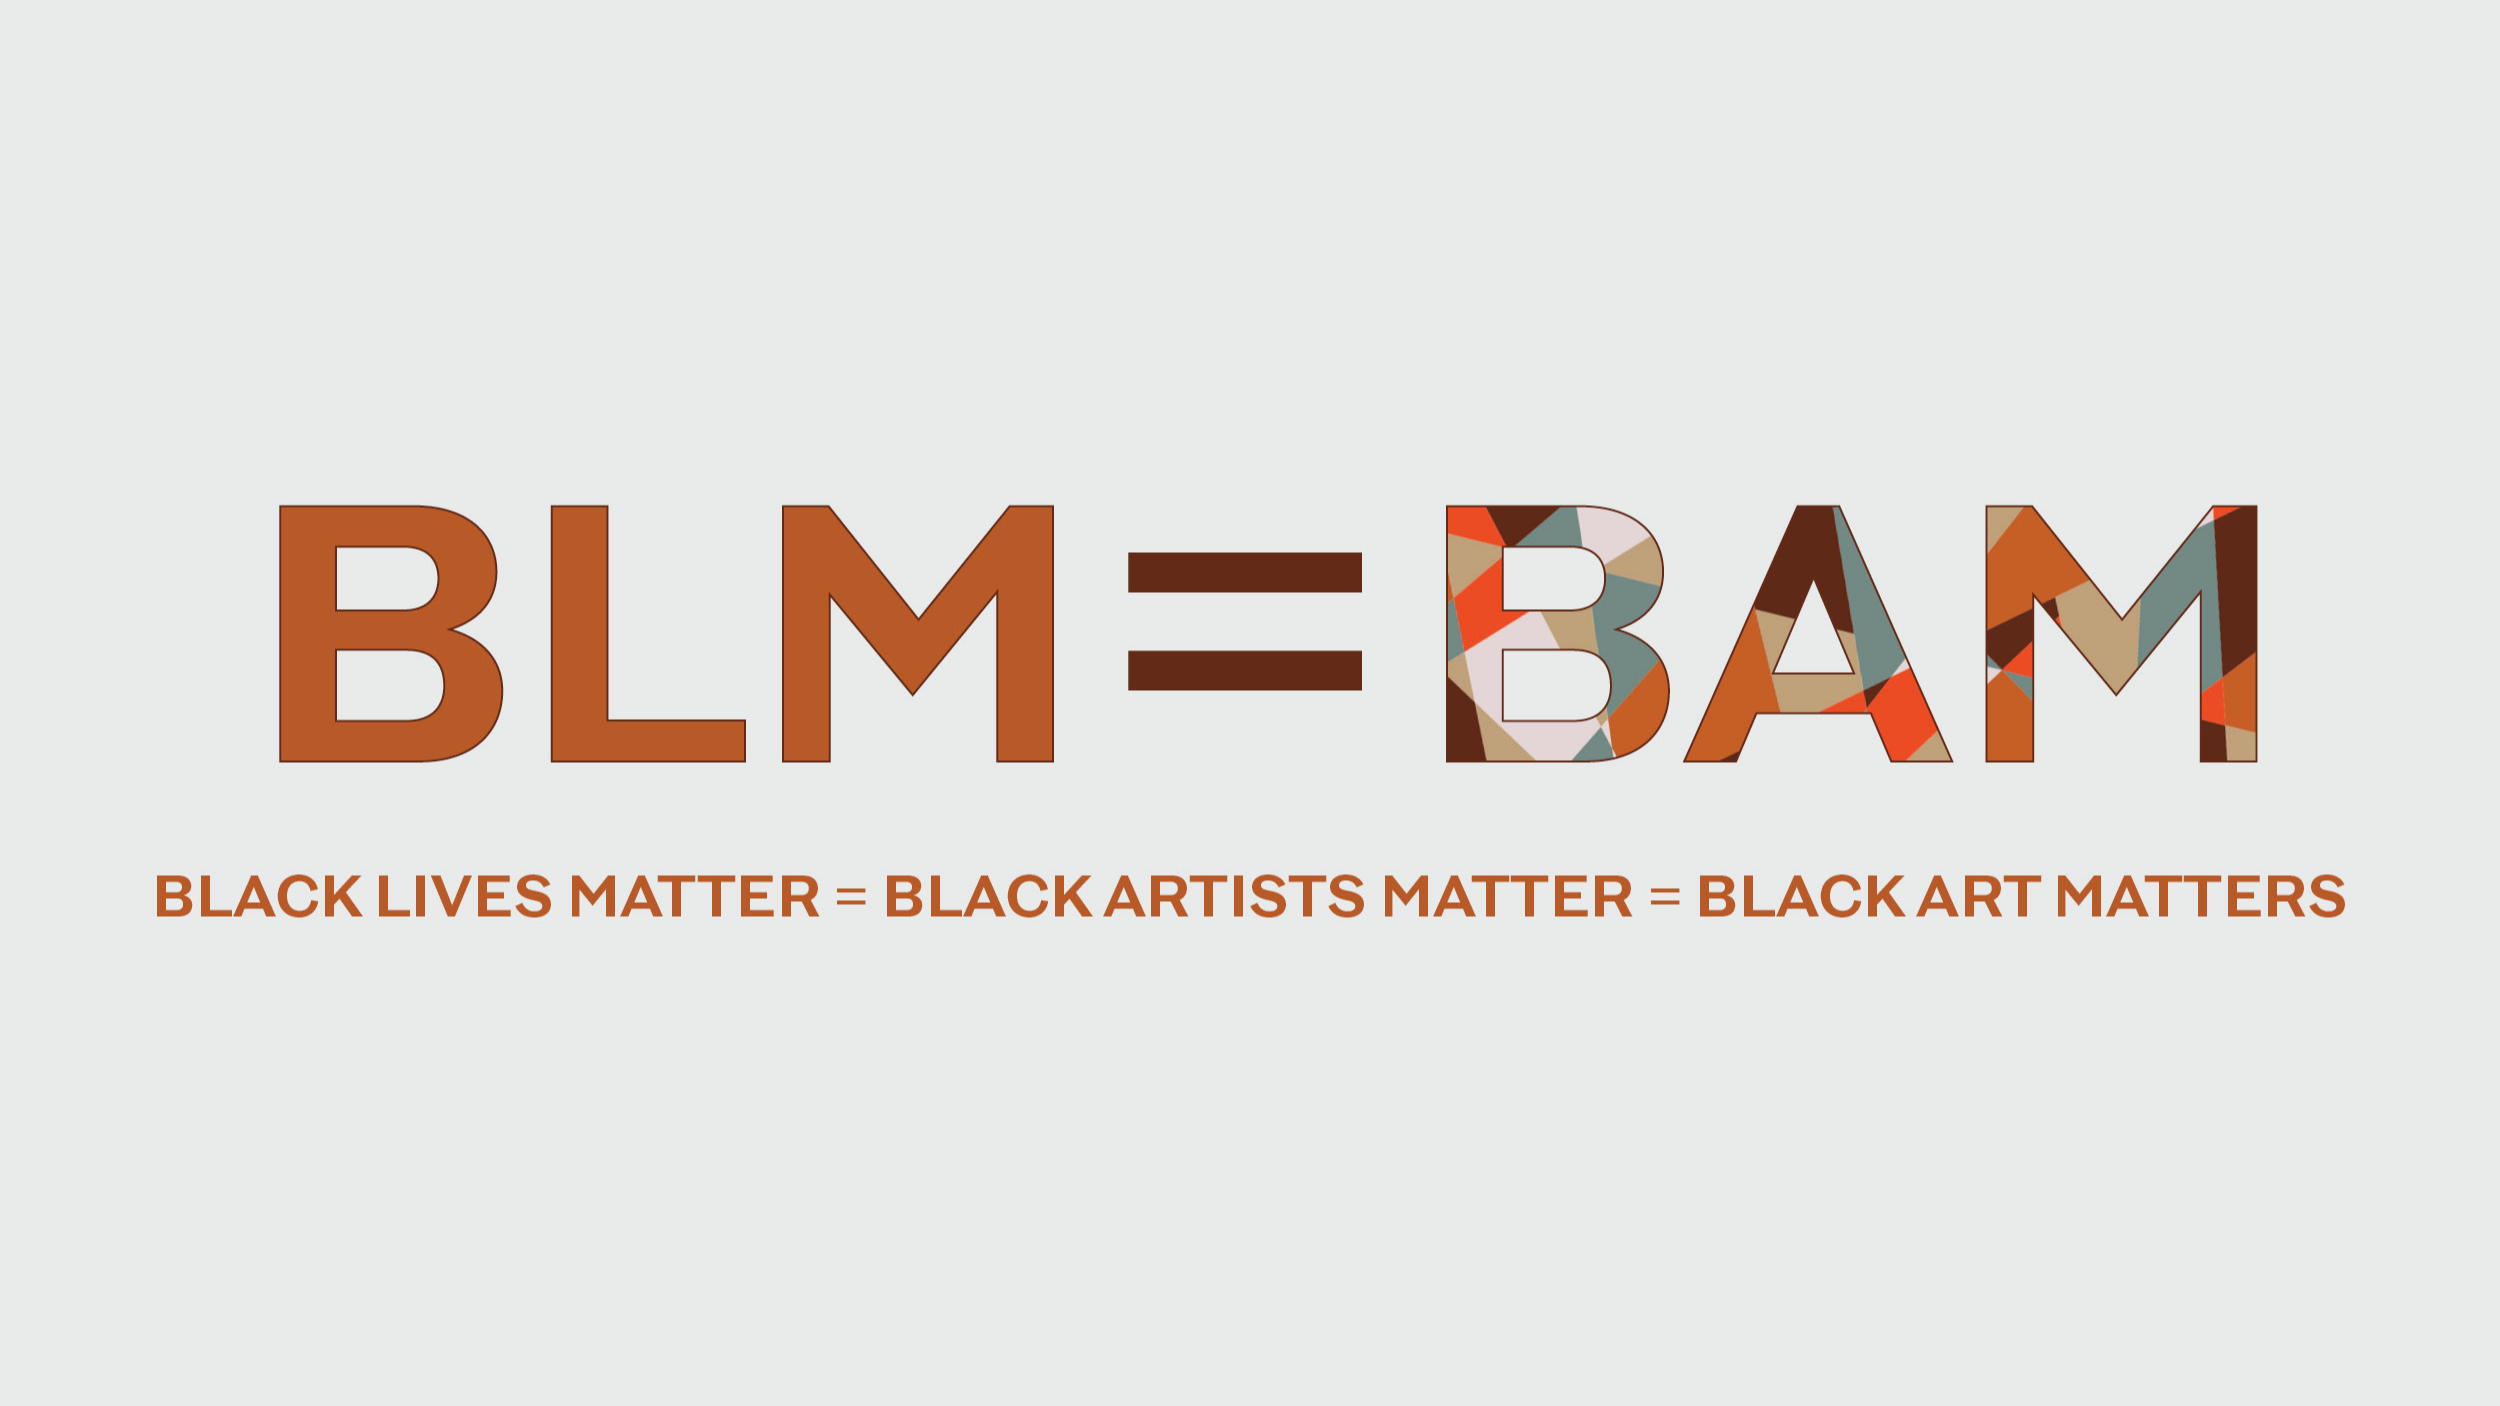 About BLM = BAM